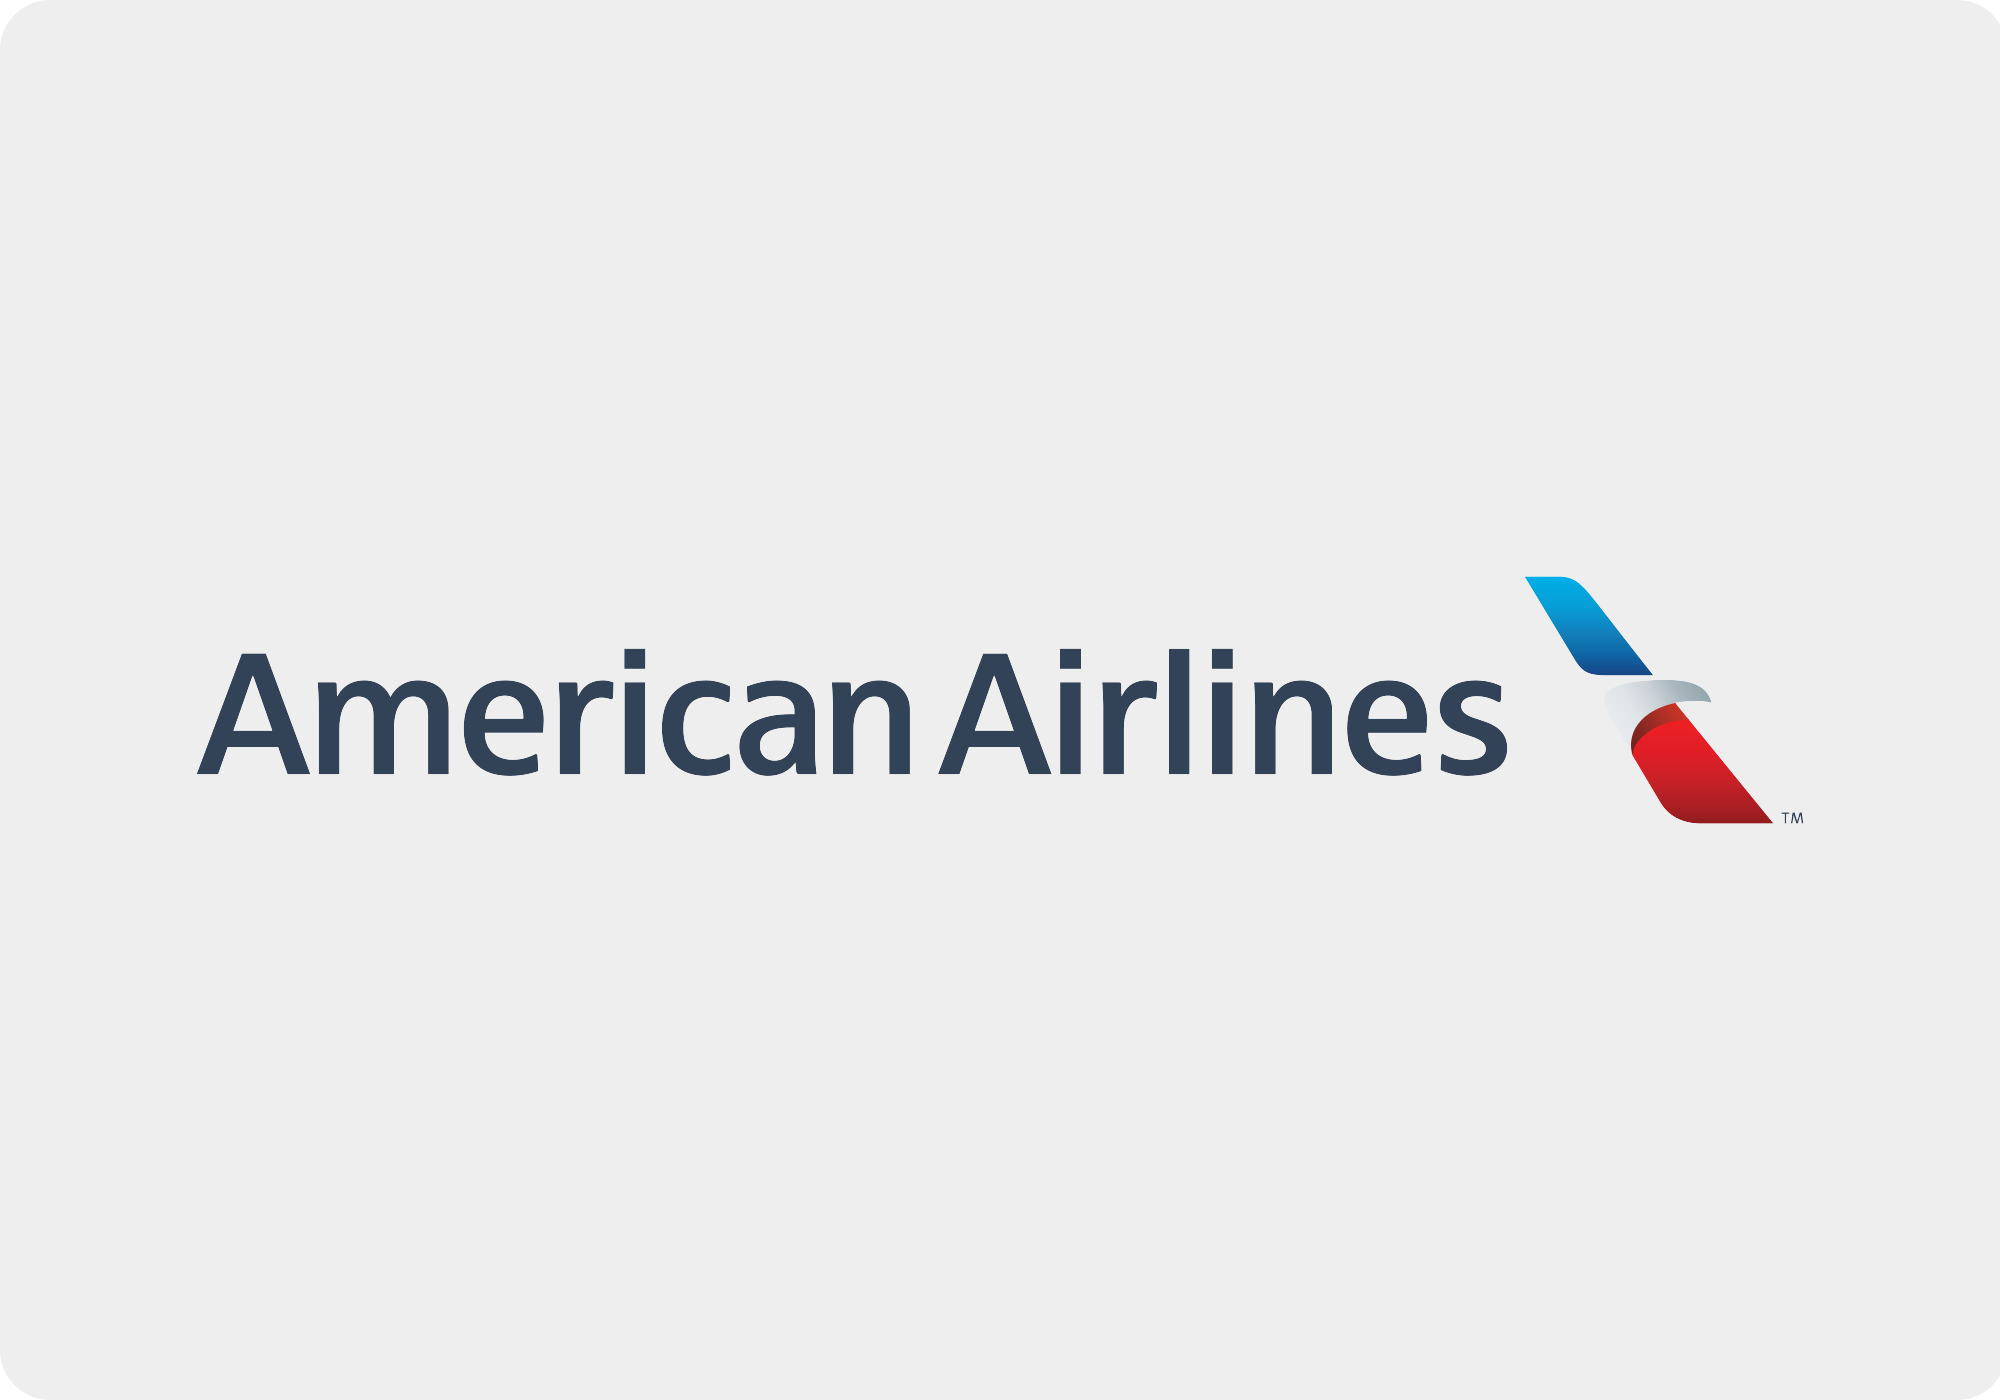 BARIN - American Airlines logo